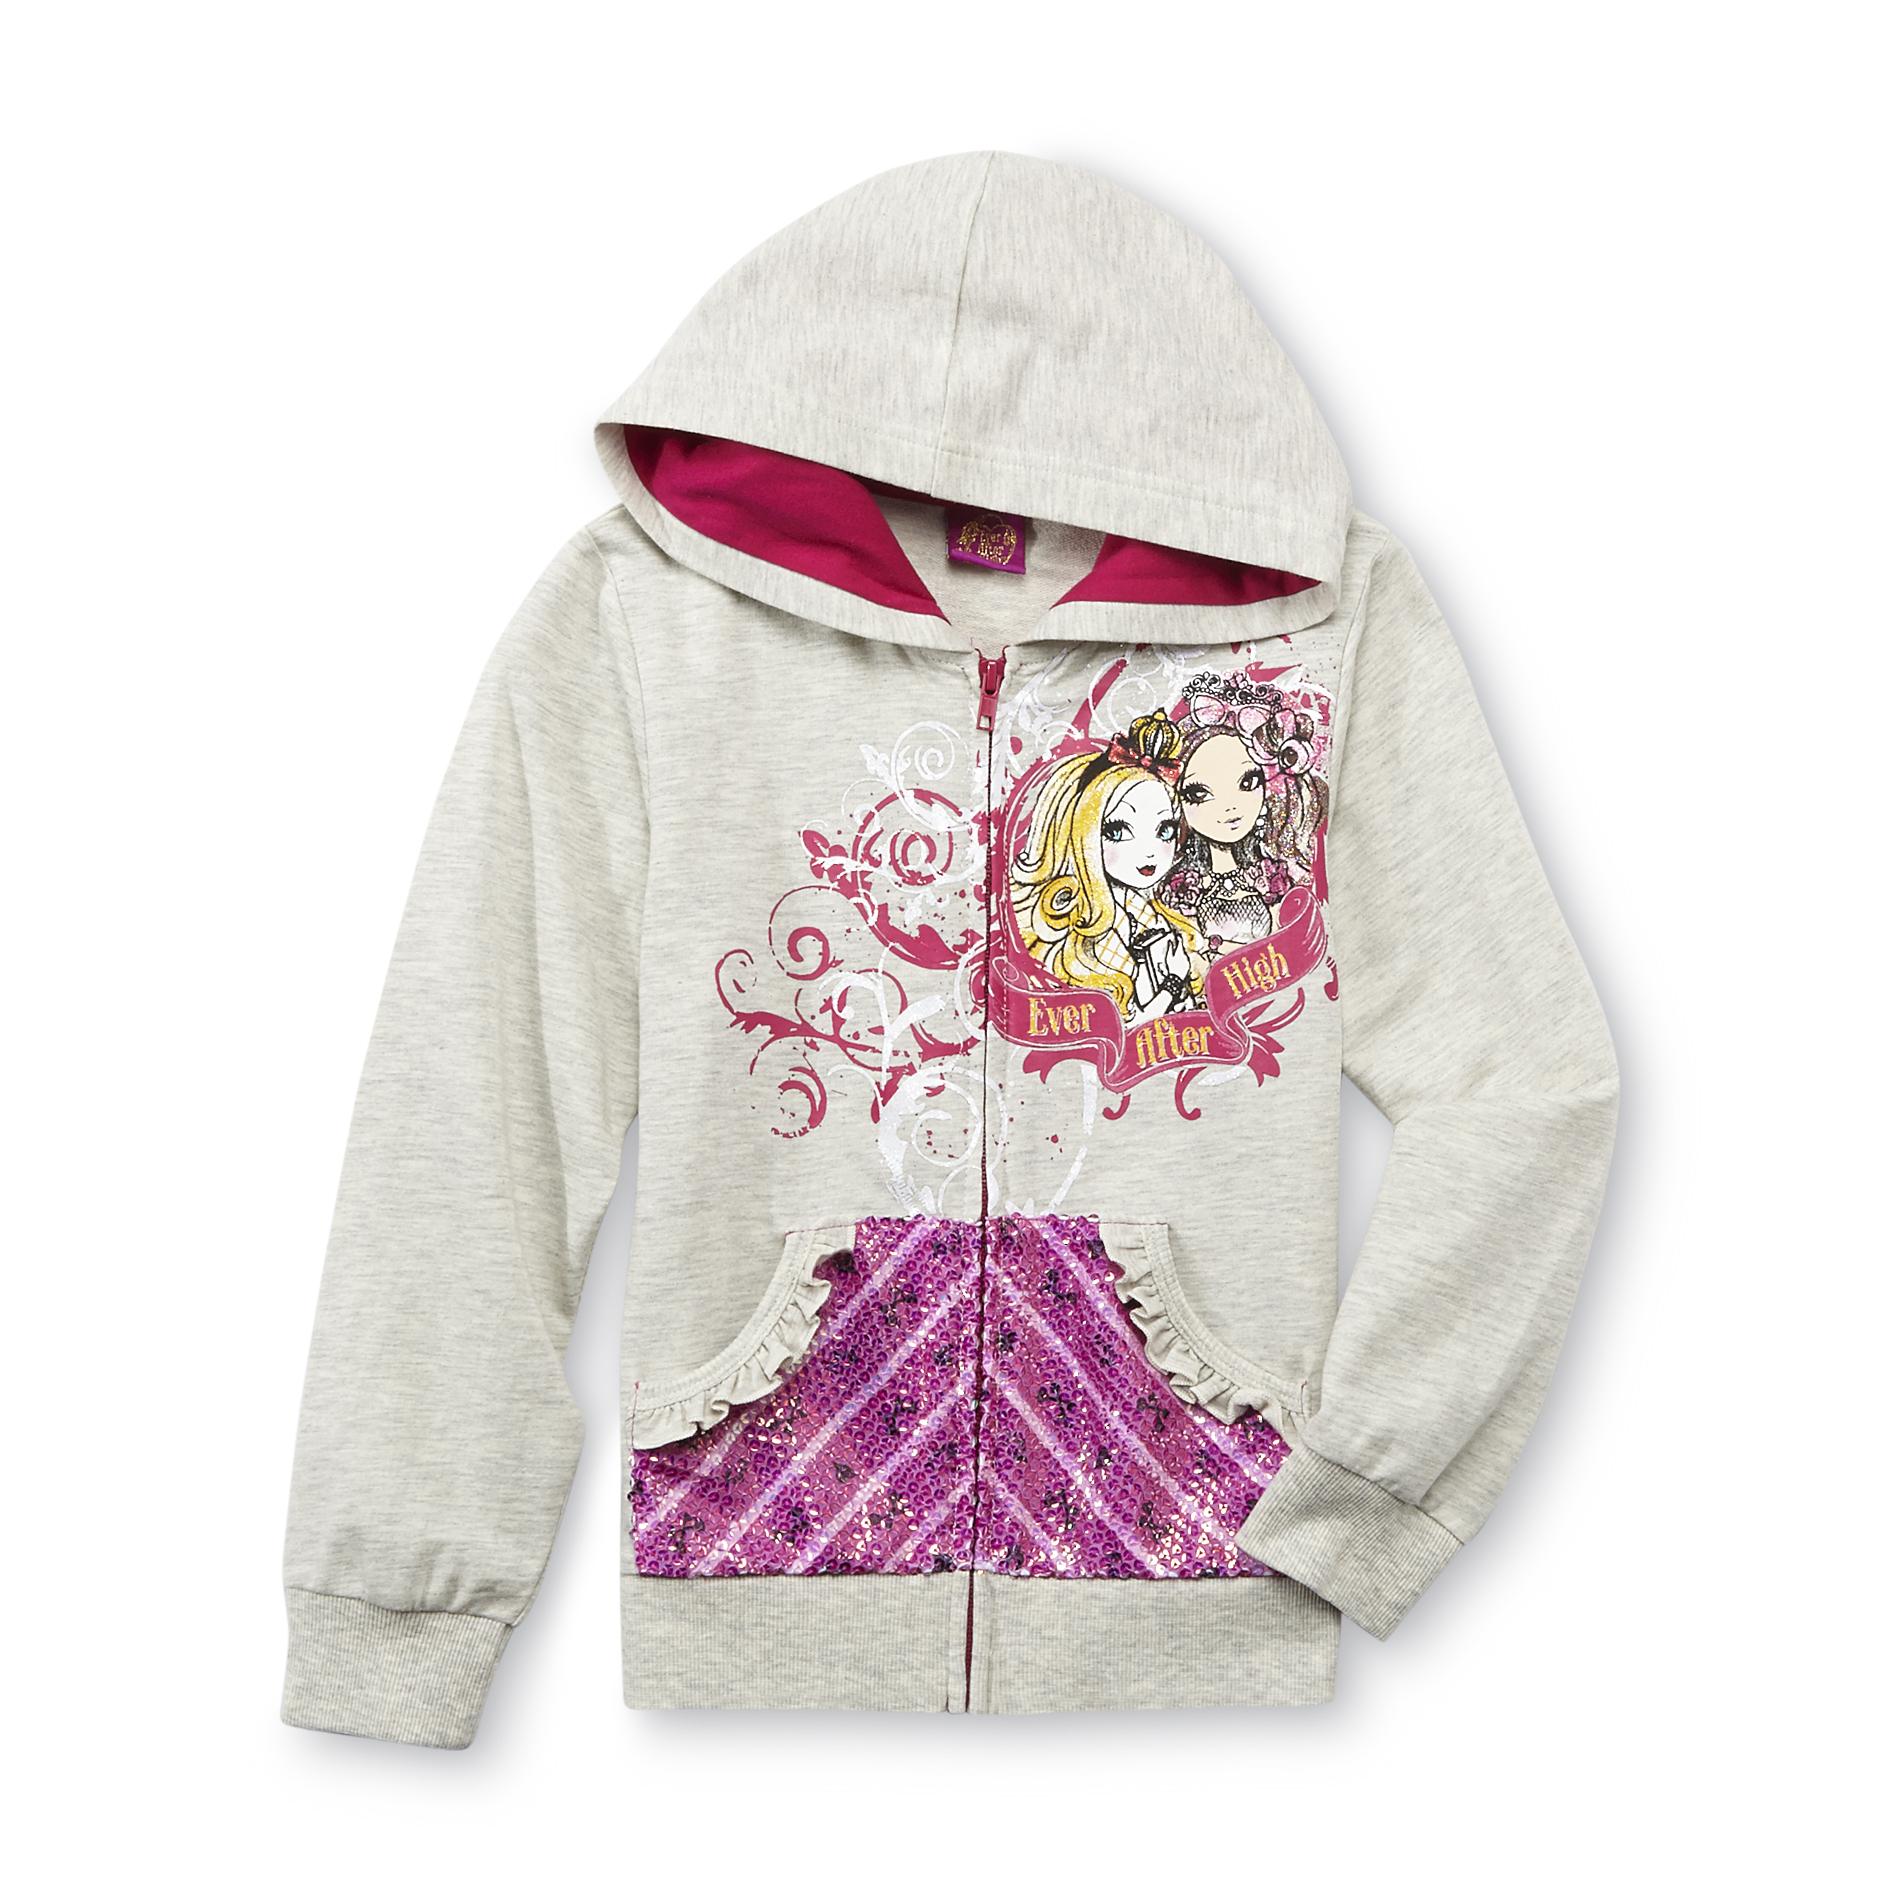 Ever After High Girl's Sequined Hoodie Jacket - Royals